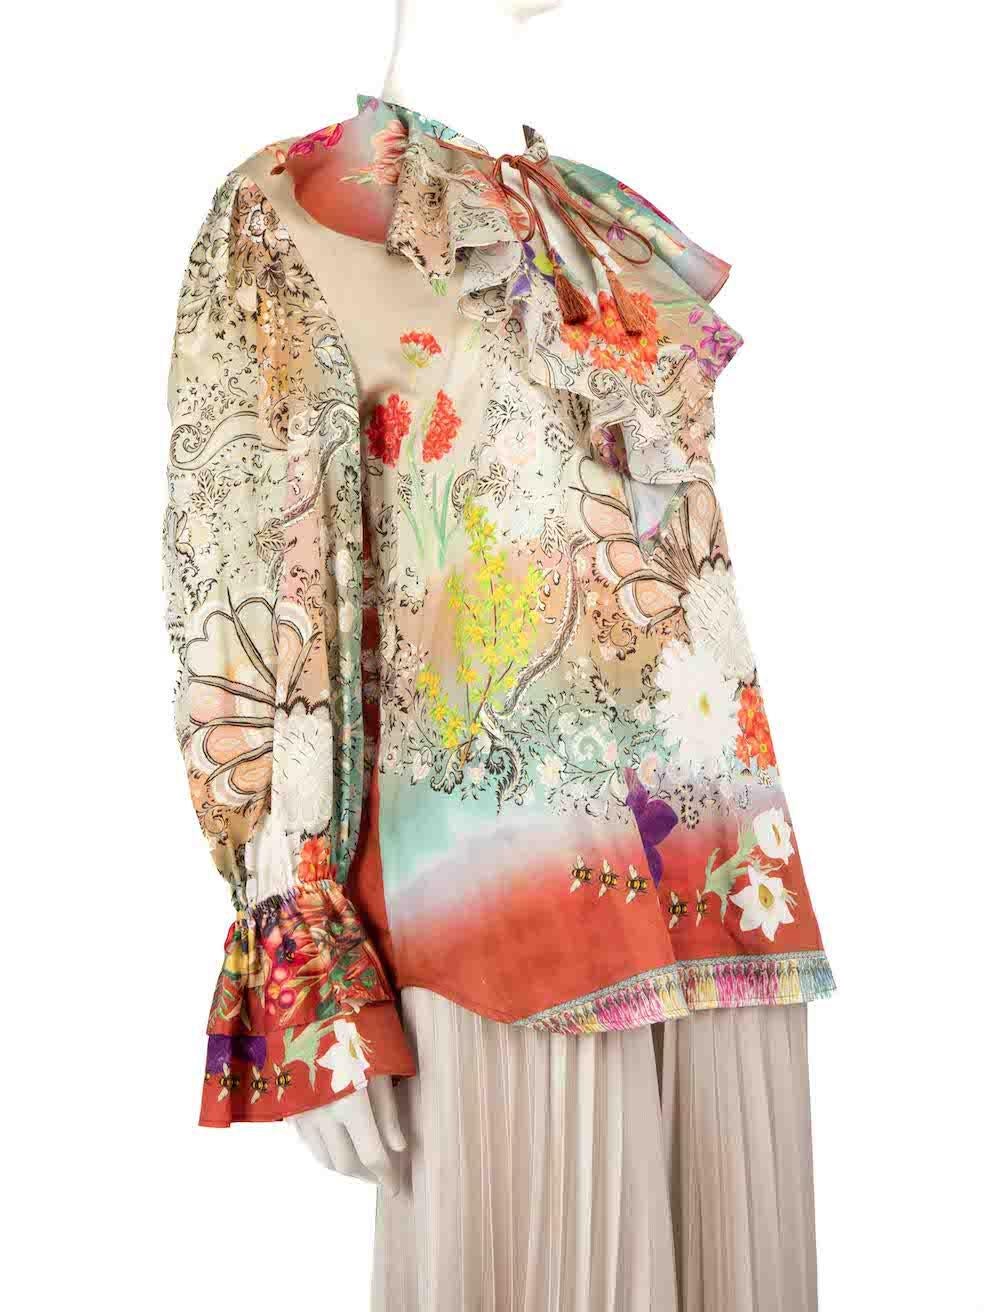 CONDITION is Very good. Hardly any visible wear to the blouse is evident on this used Etro designer resale item.
 
 
 
 Details
 
 
 Multicolour
 
 Cotton
 
 Blouse
 
 Floral print
 
 Long sleeves
 
 Ruffle cuffs
 
 V-neck
 
 Tassel details
 
 
 
 
